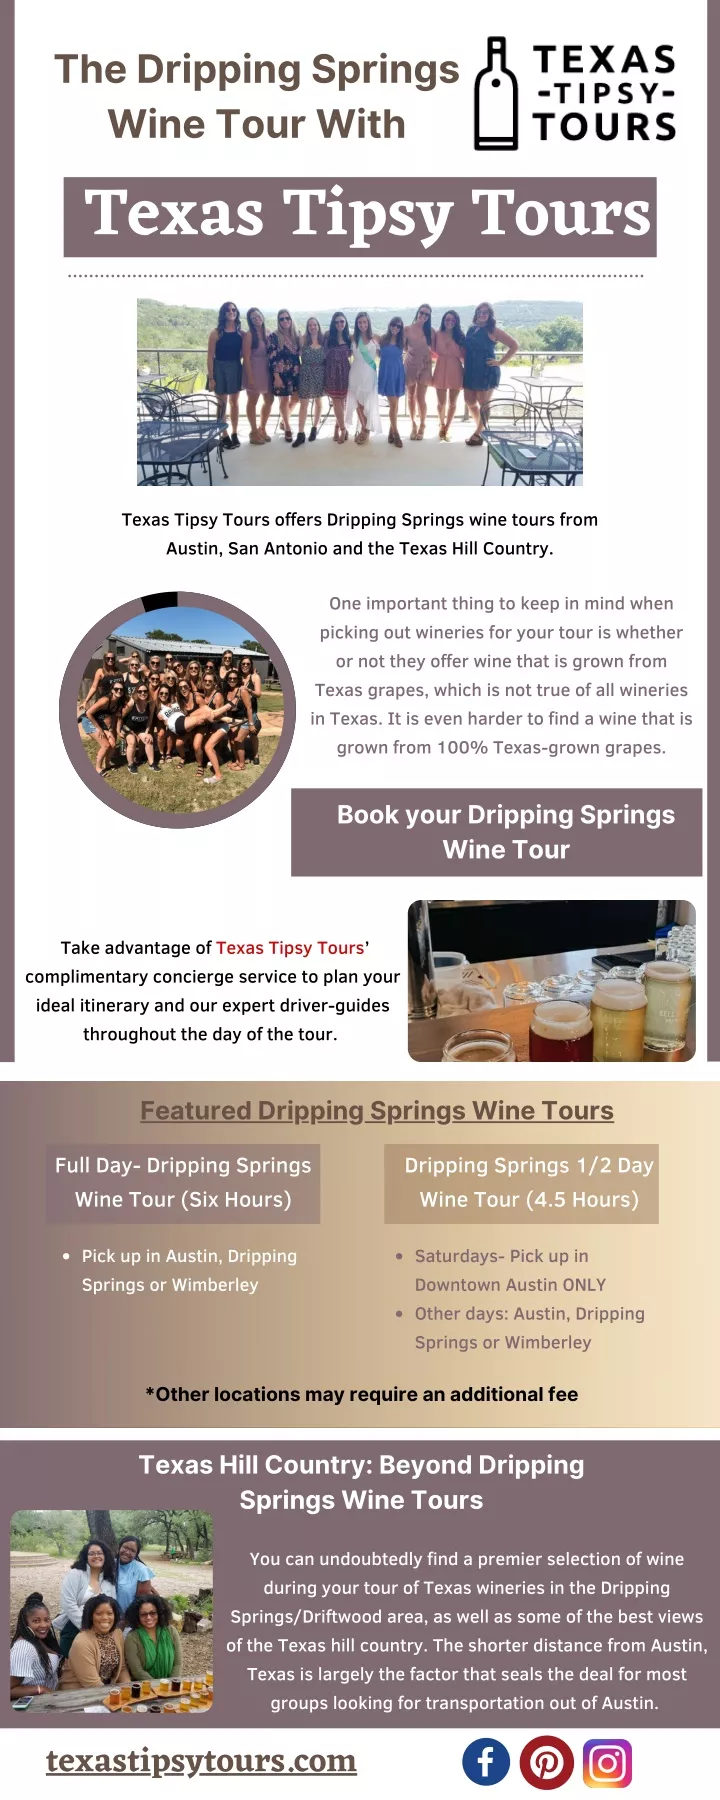 the dripping springs wine tour with texas tipsy